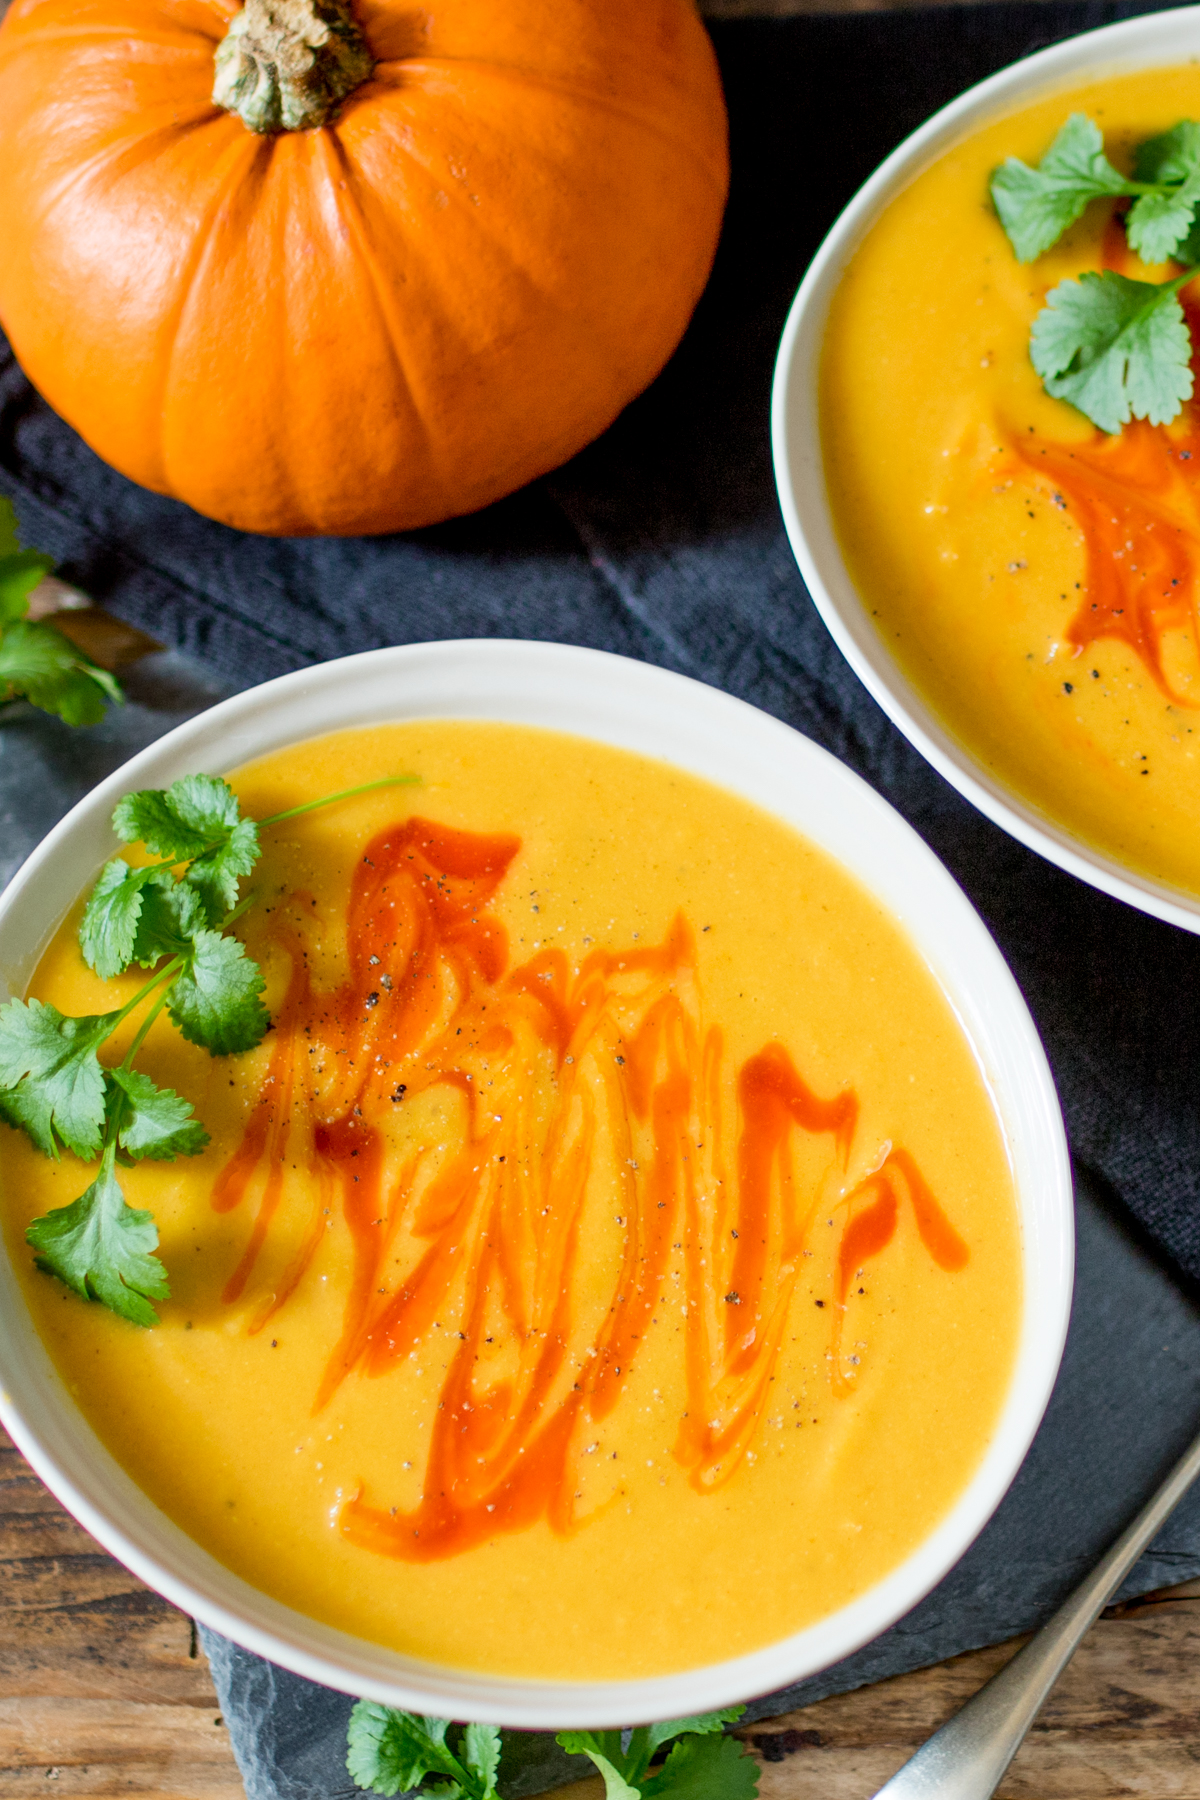 Curried Pumpkin and Lentil Soup a spicy and warming lunch – ready in less than 30 minutes!